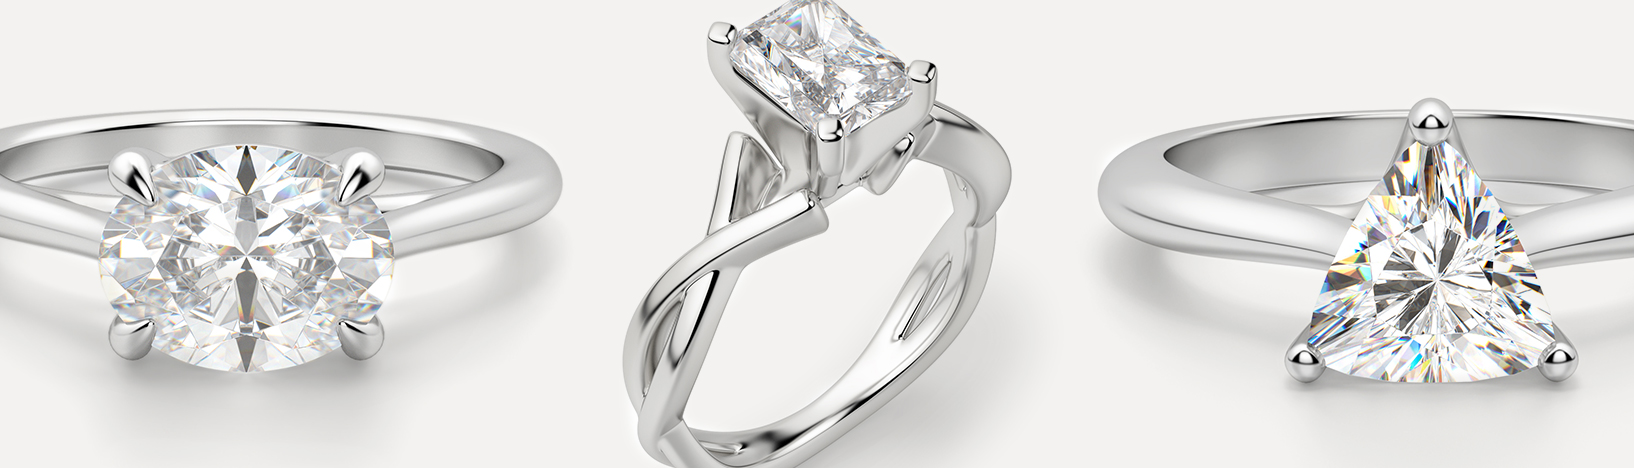 Simulated diamond engagement rings featuring different design elements.